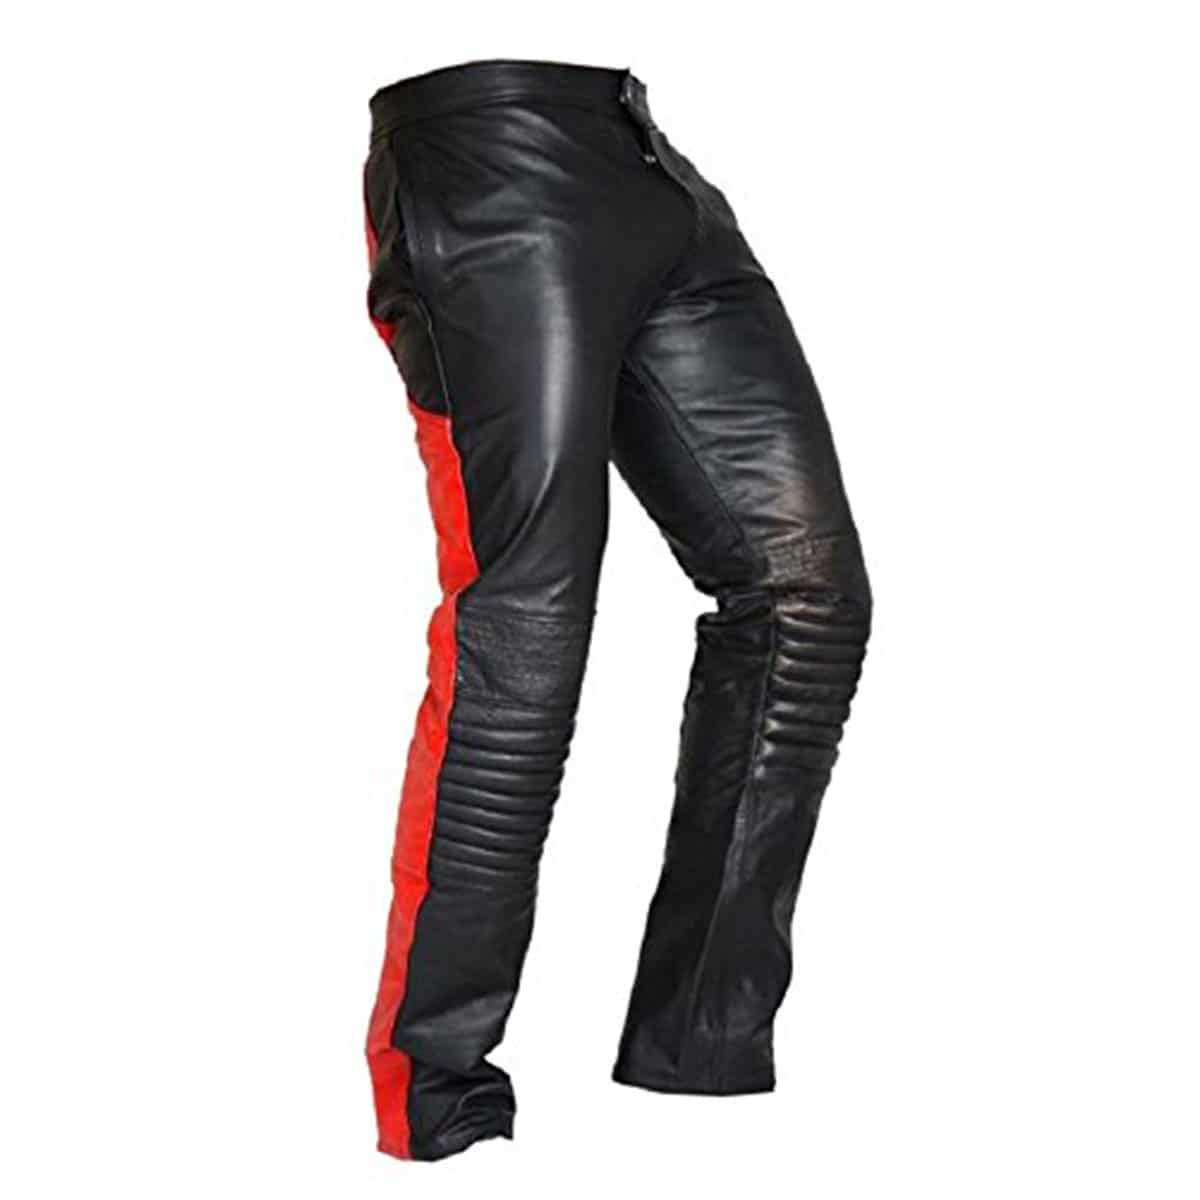 MENS BLACK LEATHER MOTORCYCLE BIKERS PANTS JEANS TROUSERS - JEANS4